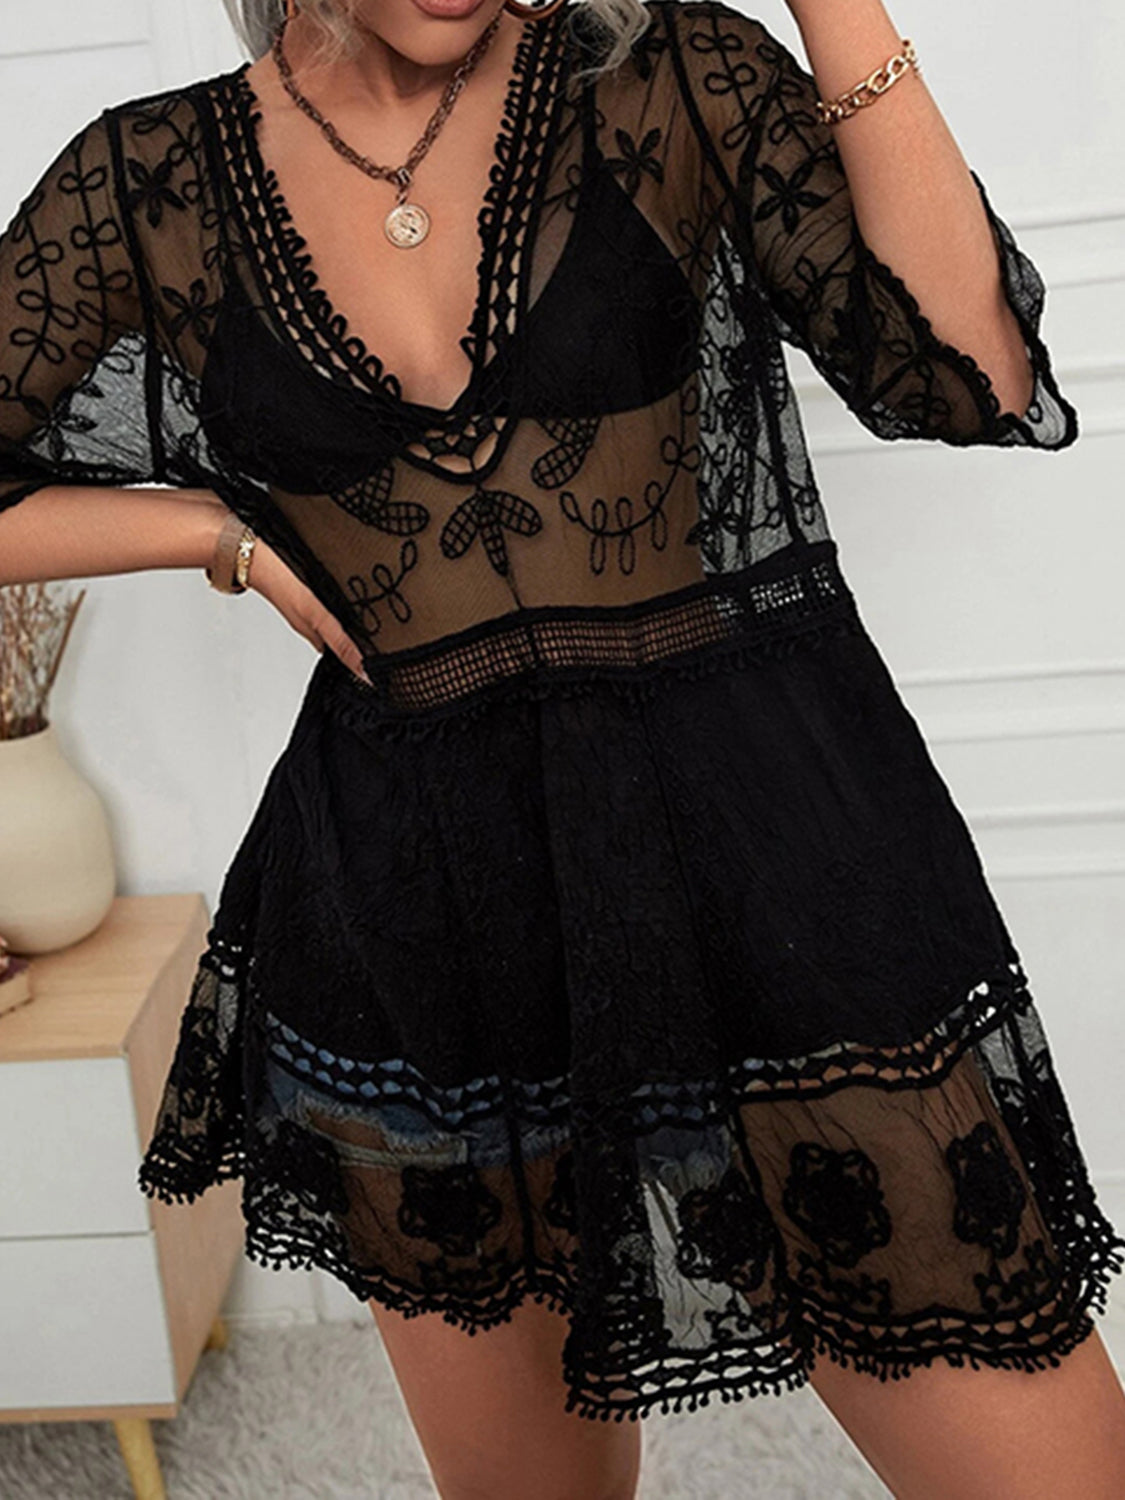 Semi-Sheer Lace Detail Beach Cover-Up Dress Black One Size